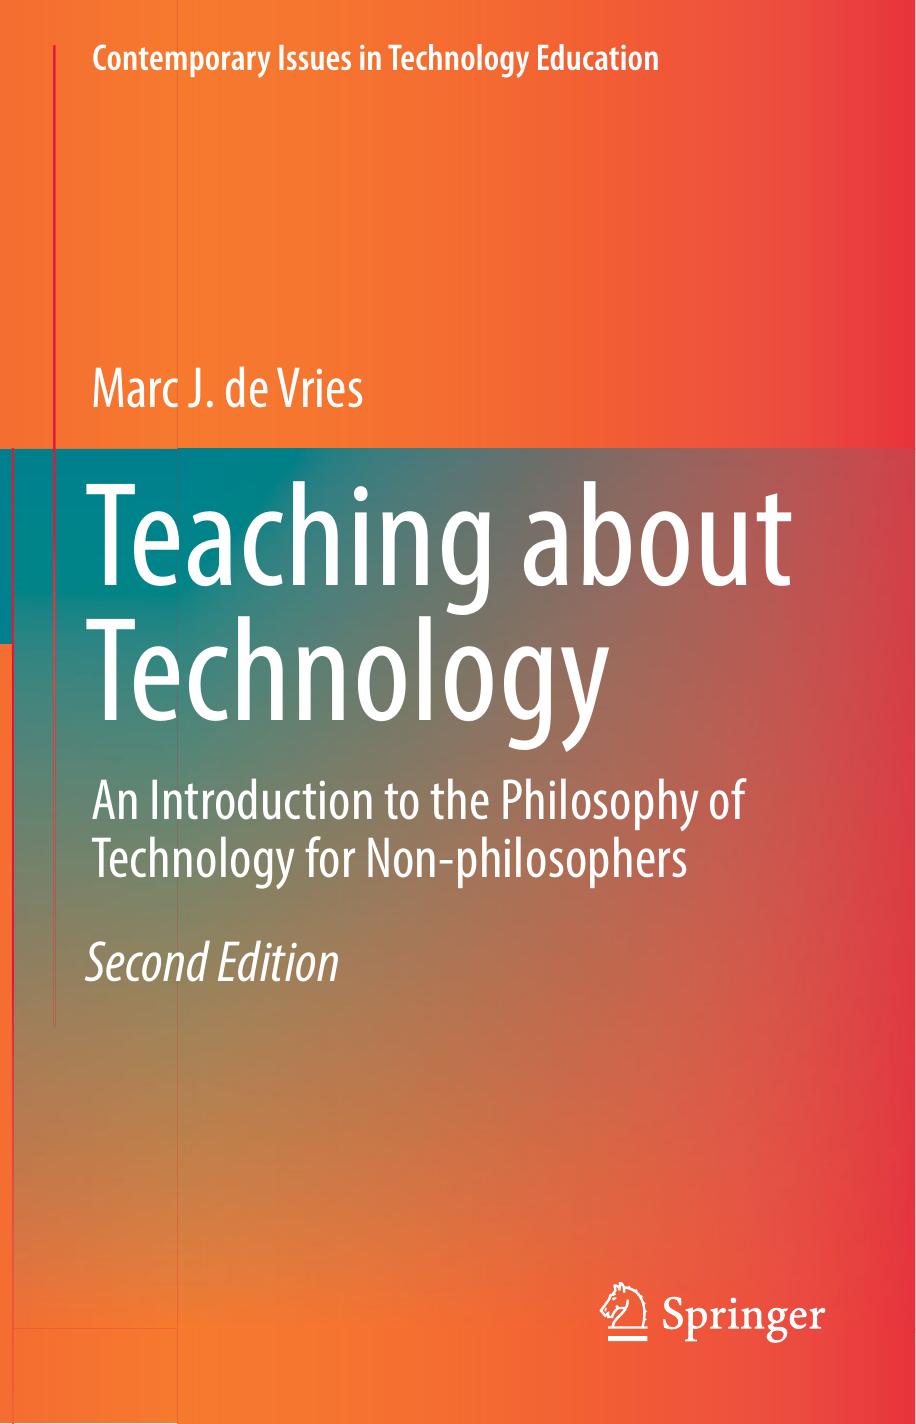 Contemporary Issues in Technology Education, Teaching about Technology, An Introduction to the Philosophy of Technology for Non-philosophers, 2016